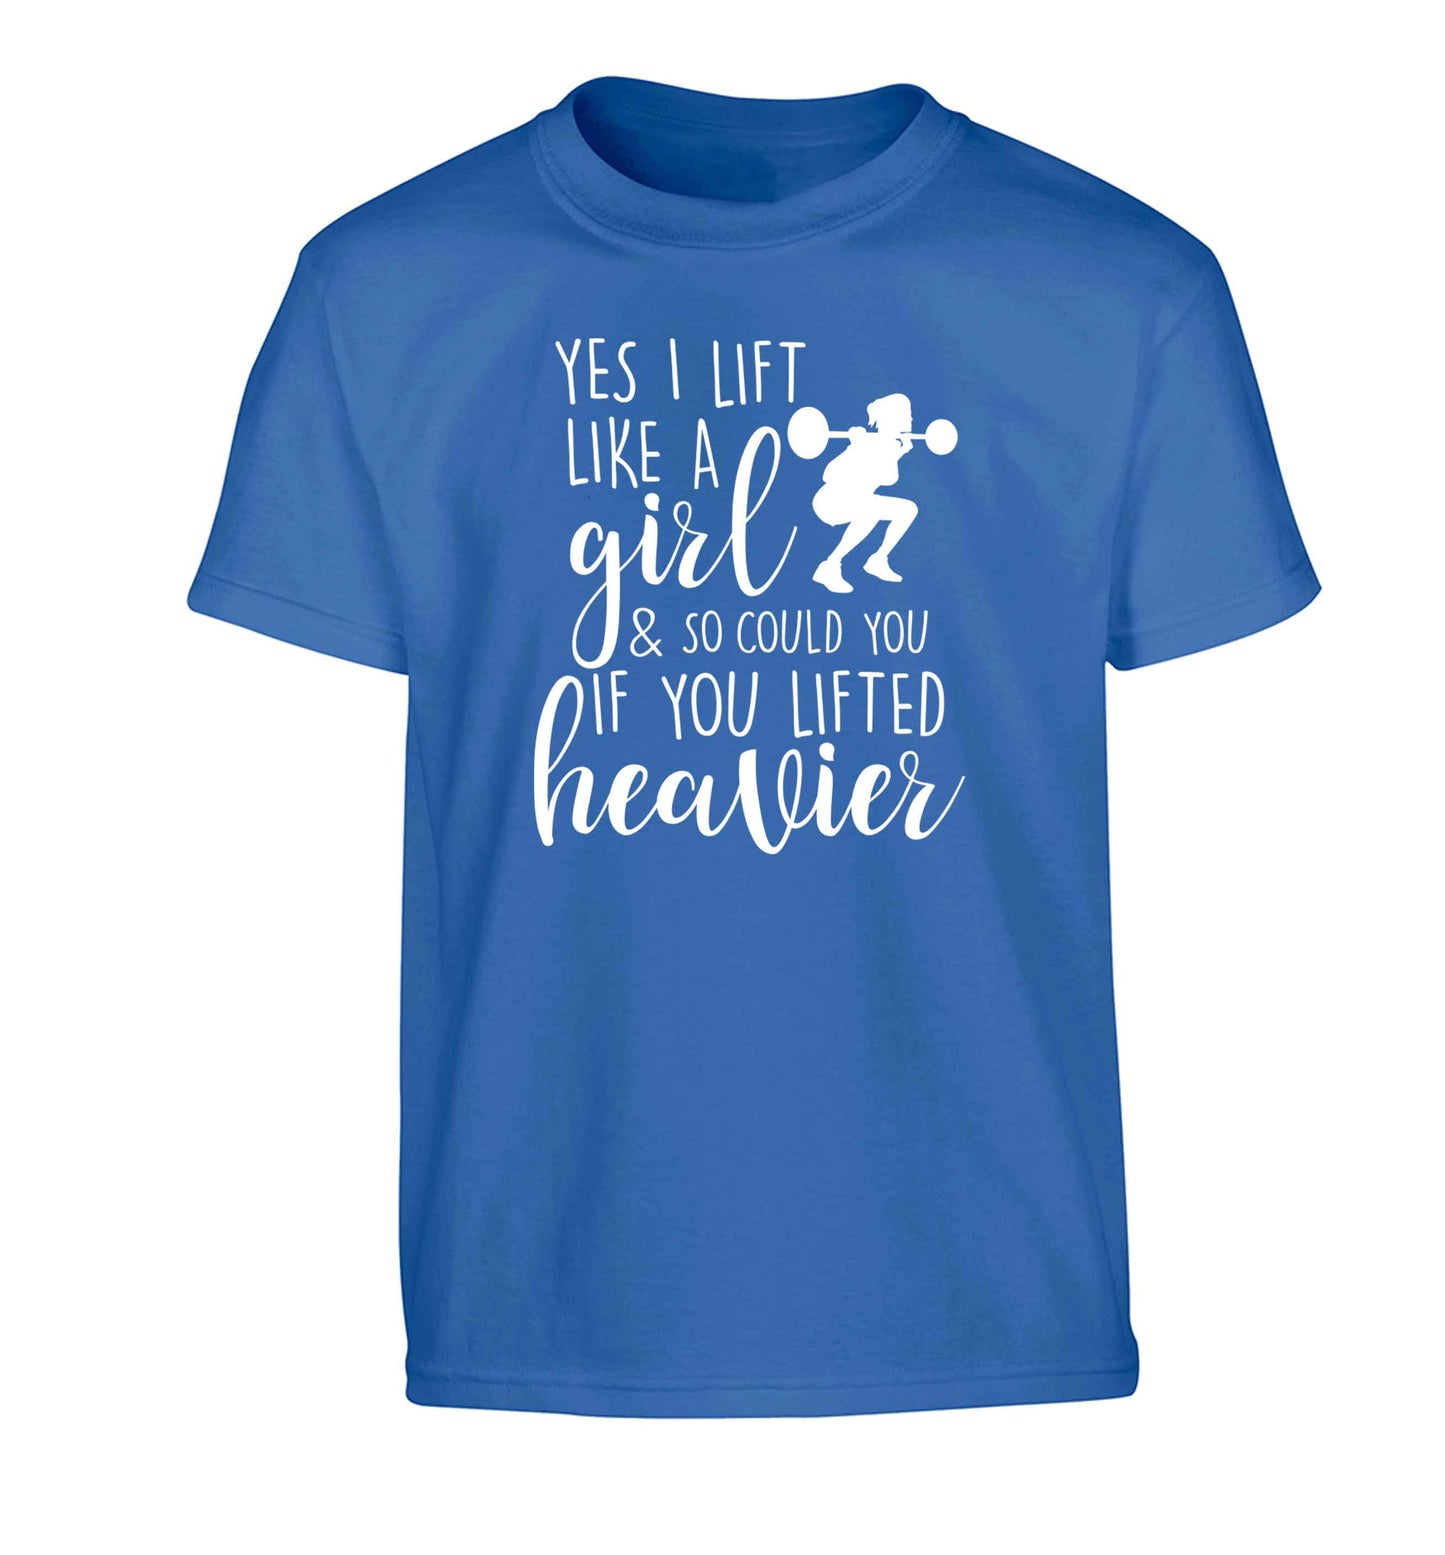 Yes I lift like a girl and so could you if you lifted heavier Children's blue Tshirt 12-13 Years